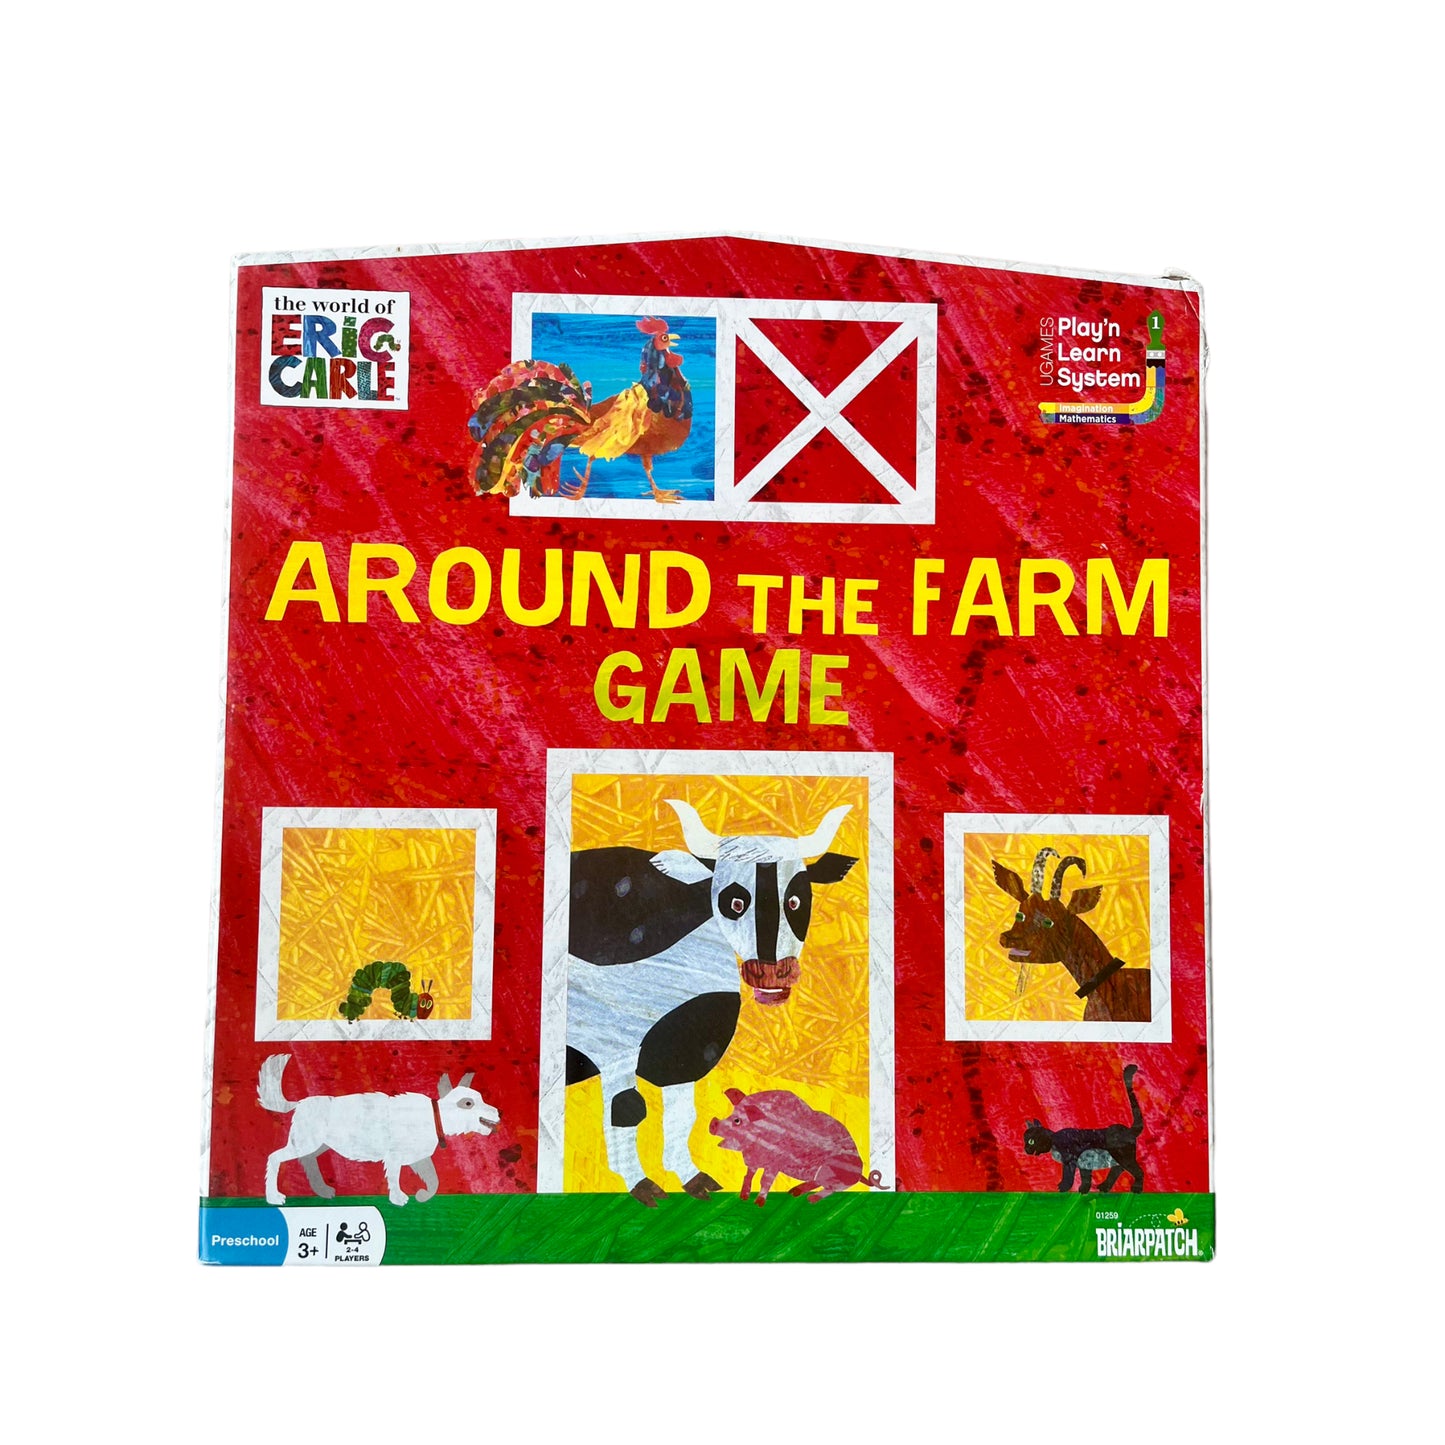 The world of Eric Carle - Around The Farm Game